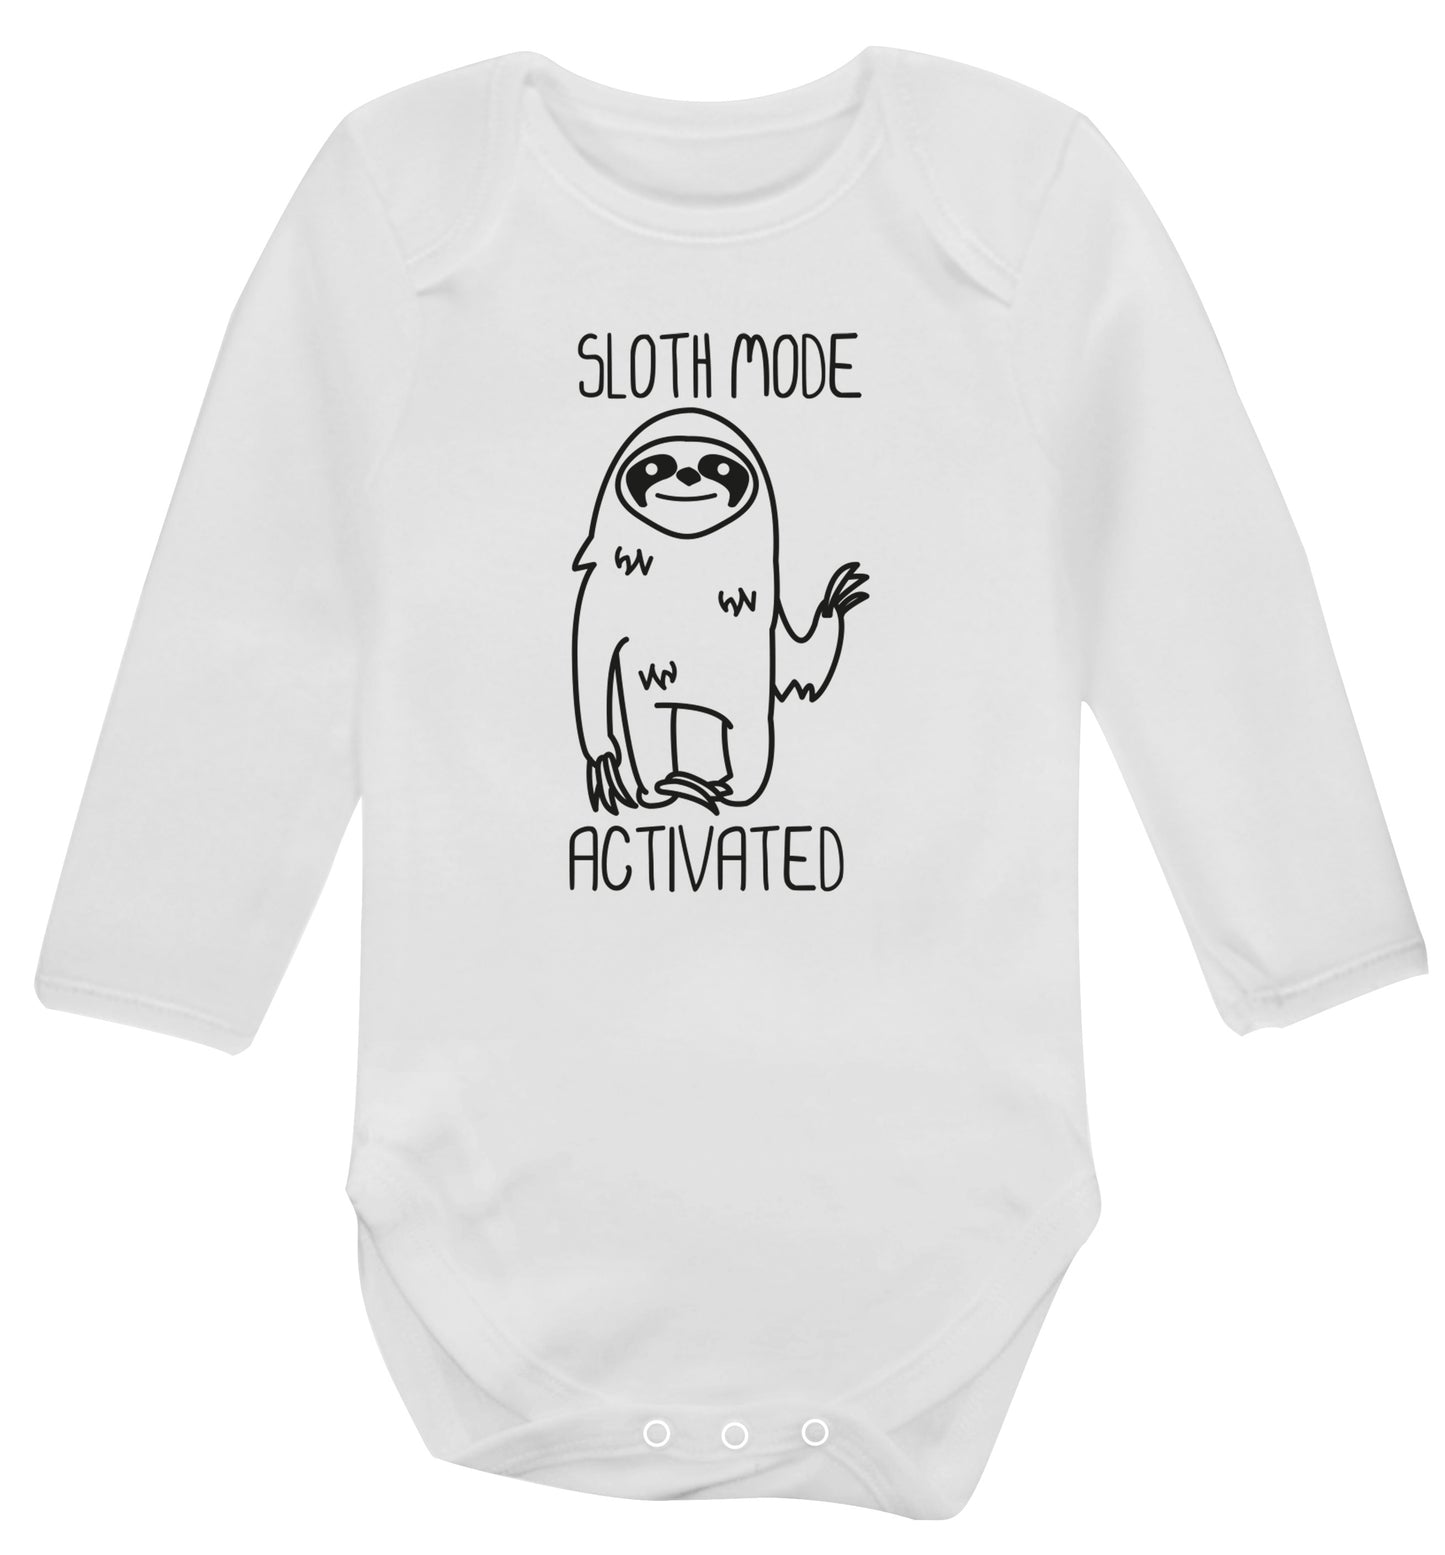 Sloth mode acitvated Baby Vest long sleeved white 6-12 months